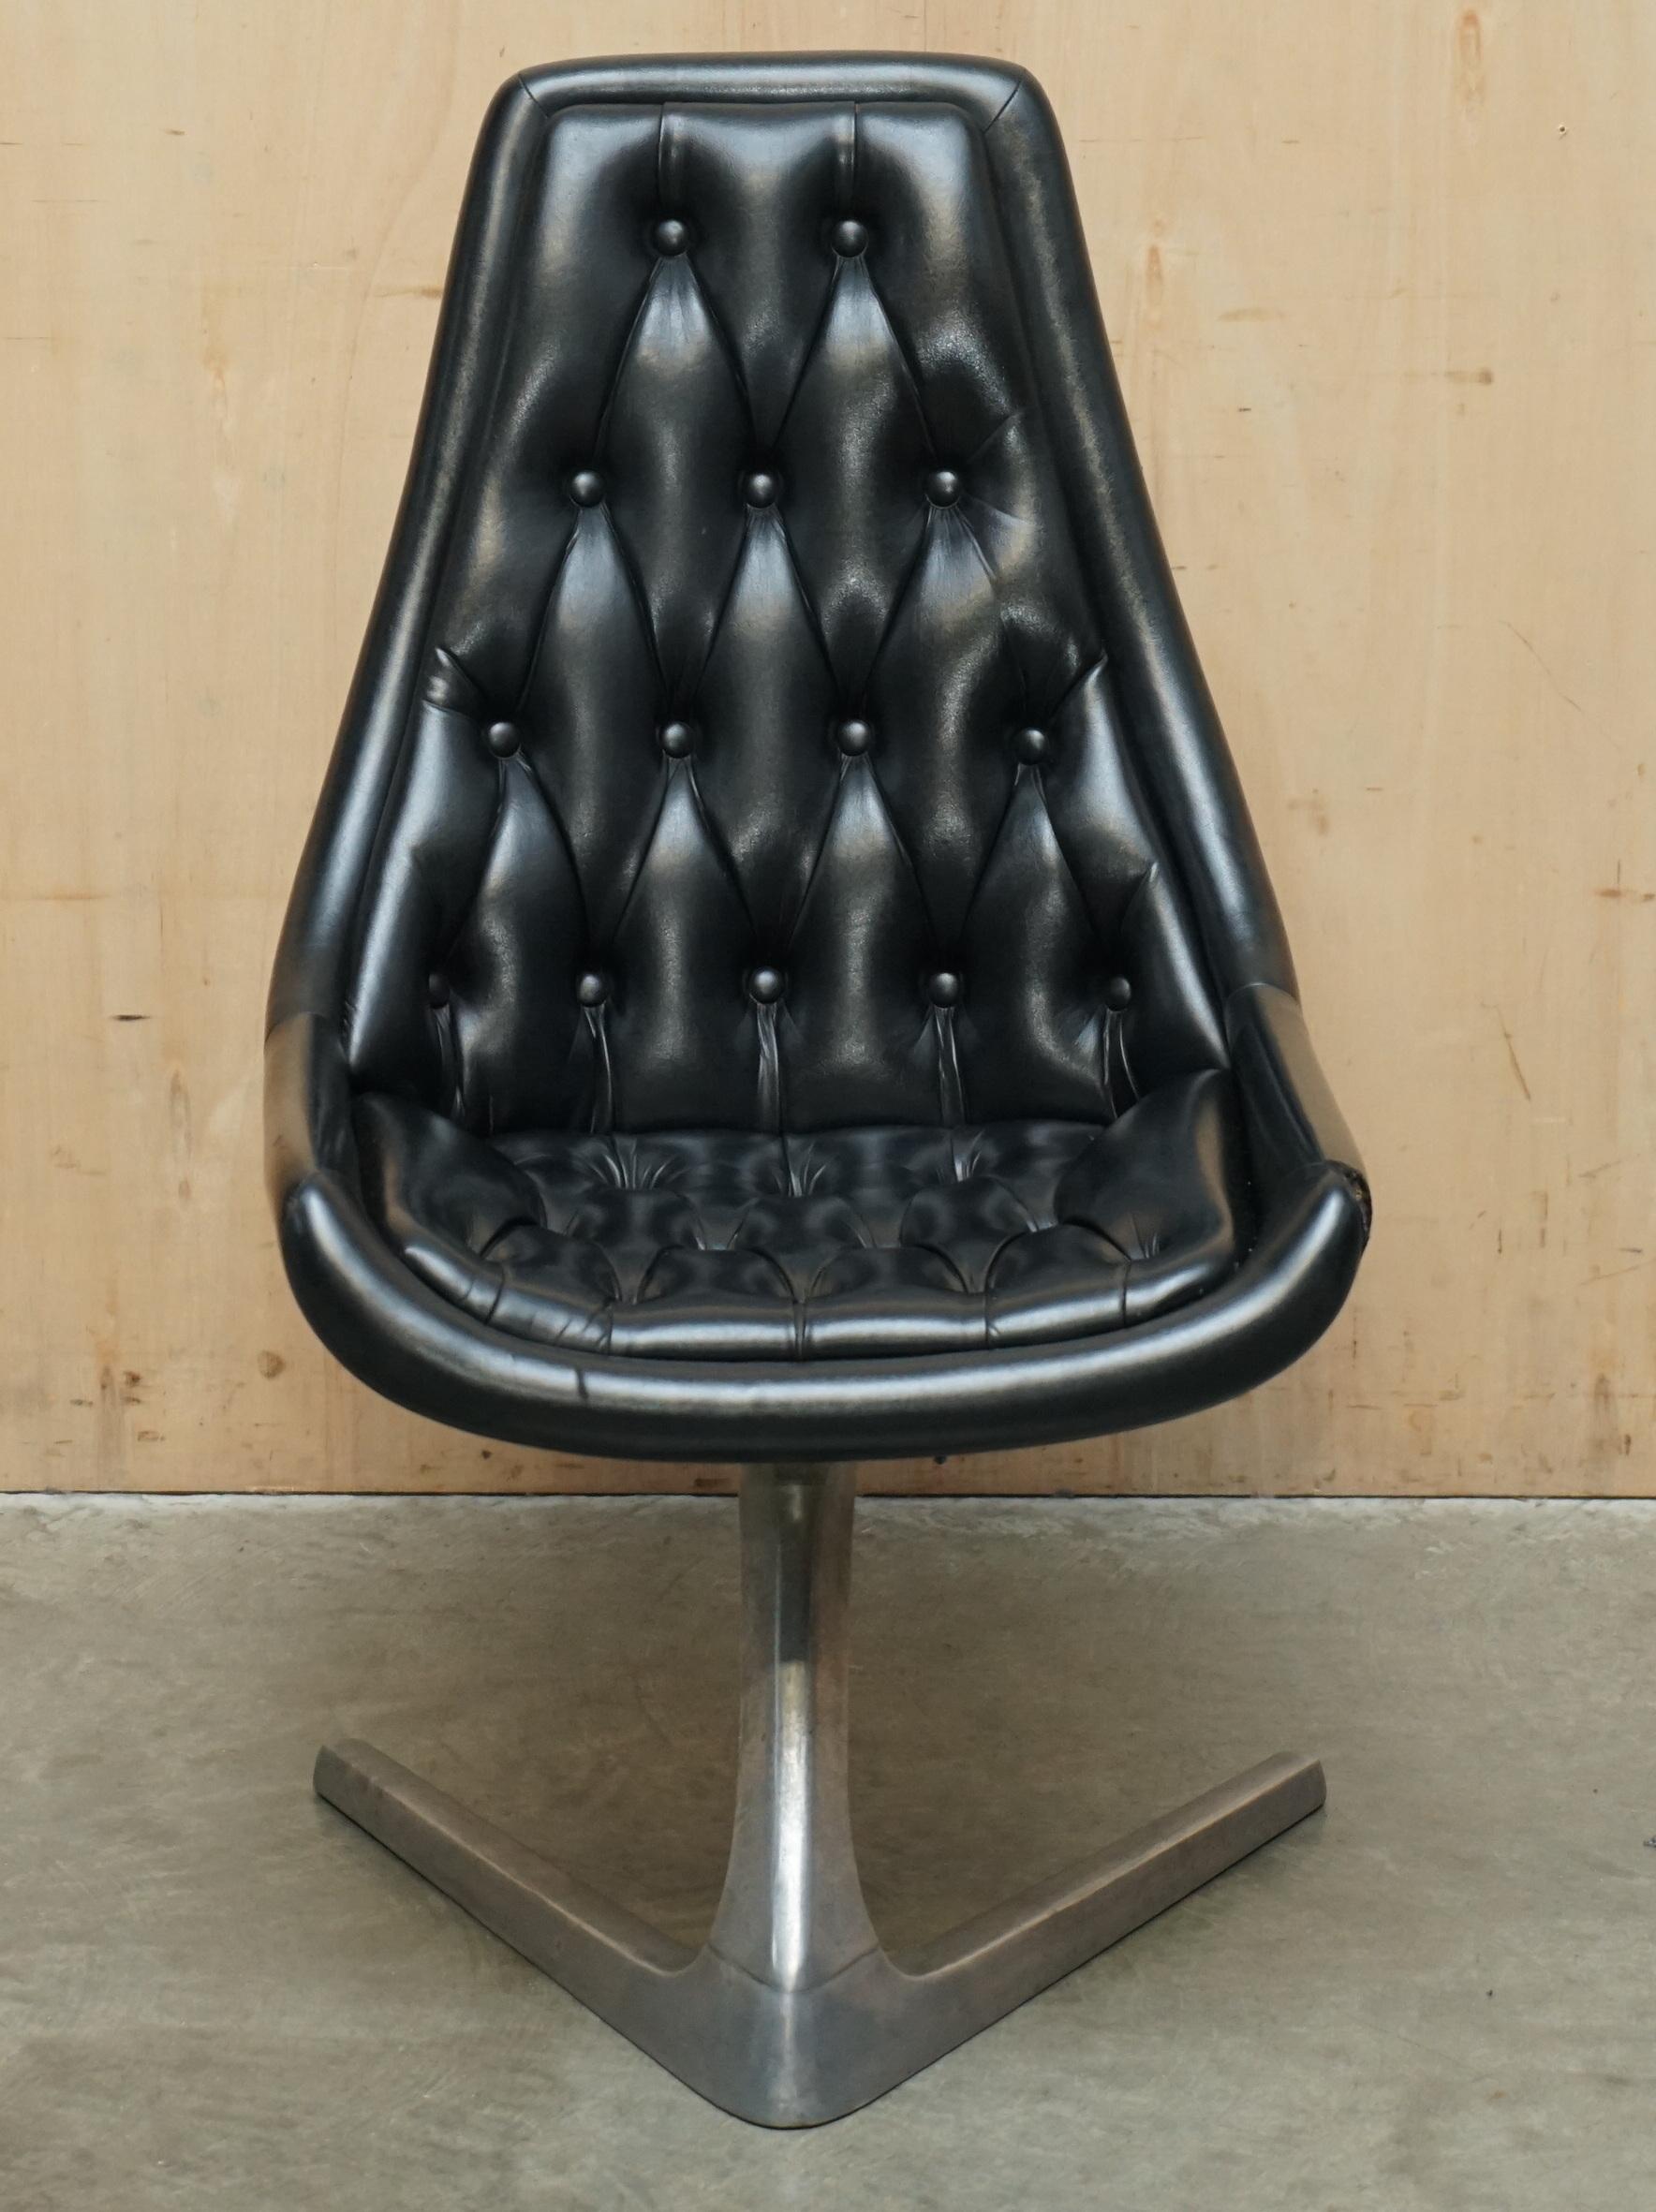 Royal House Antiques

Royal House Antiques is delighted to offer for sale this very cool and highly collectable Vladimir Kagan Chesterfield tufted swivel chair made for the original Star Trek series in the 1960's

Please note the delivery fee listed